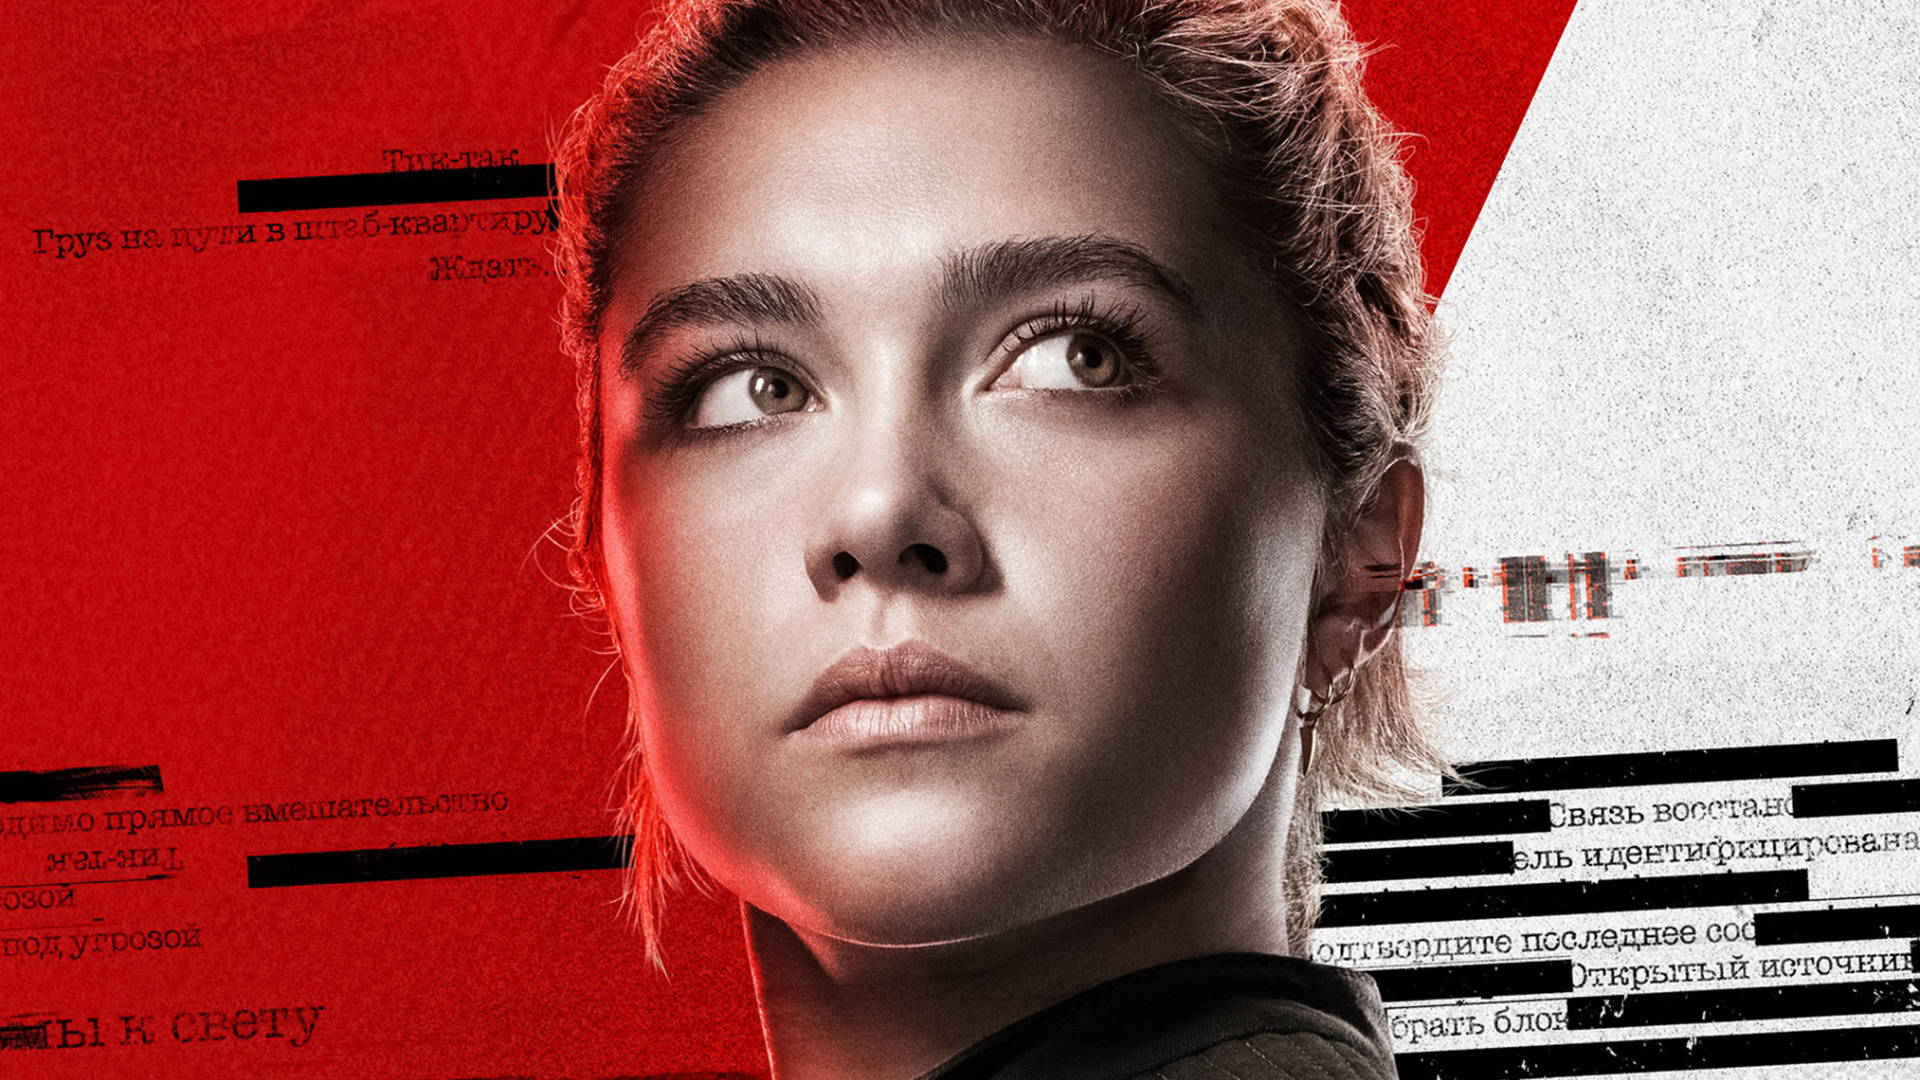 A woman with brown hair tied back in a ponytail looks directly into the camera. She is wearing a black shirt. To her left is a red and white background with text in black and white. - Florence Pugh